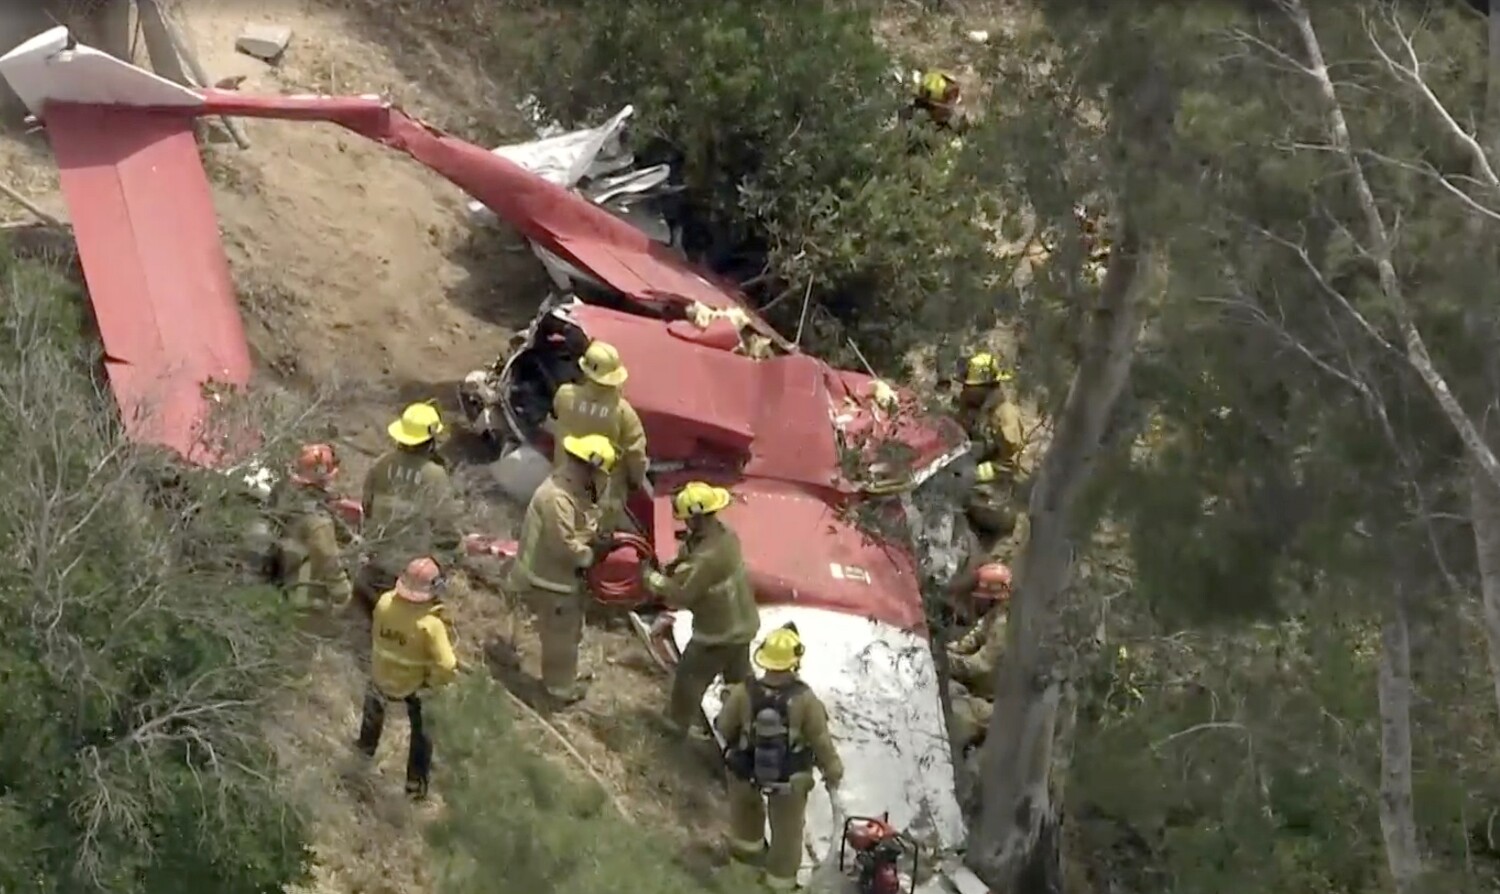 1 person reported dead after plane crash near 210 Freeway